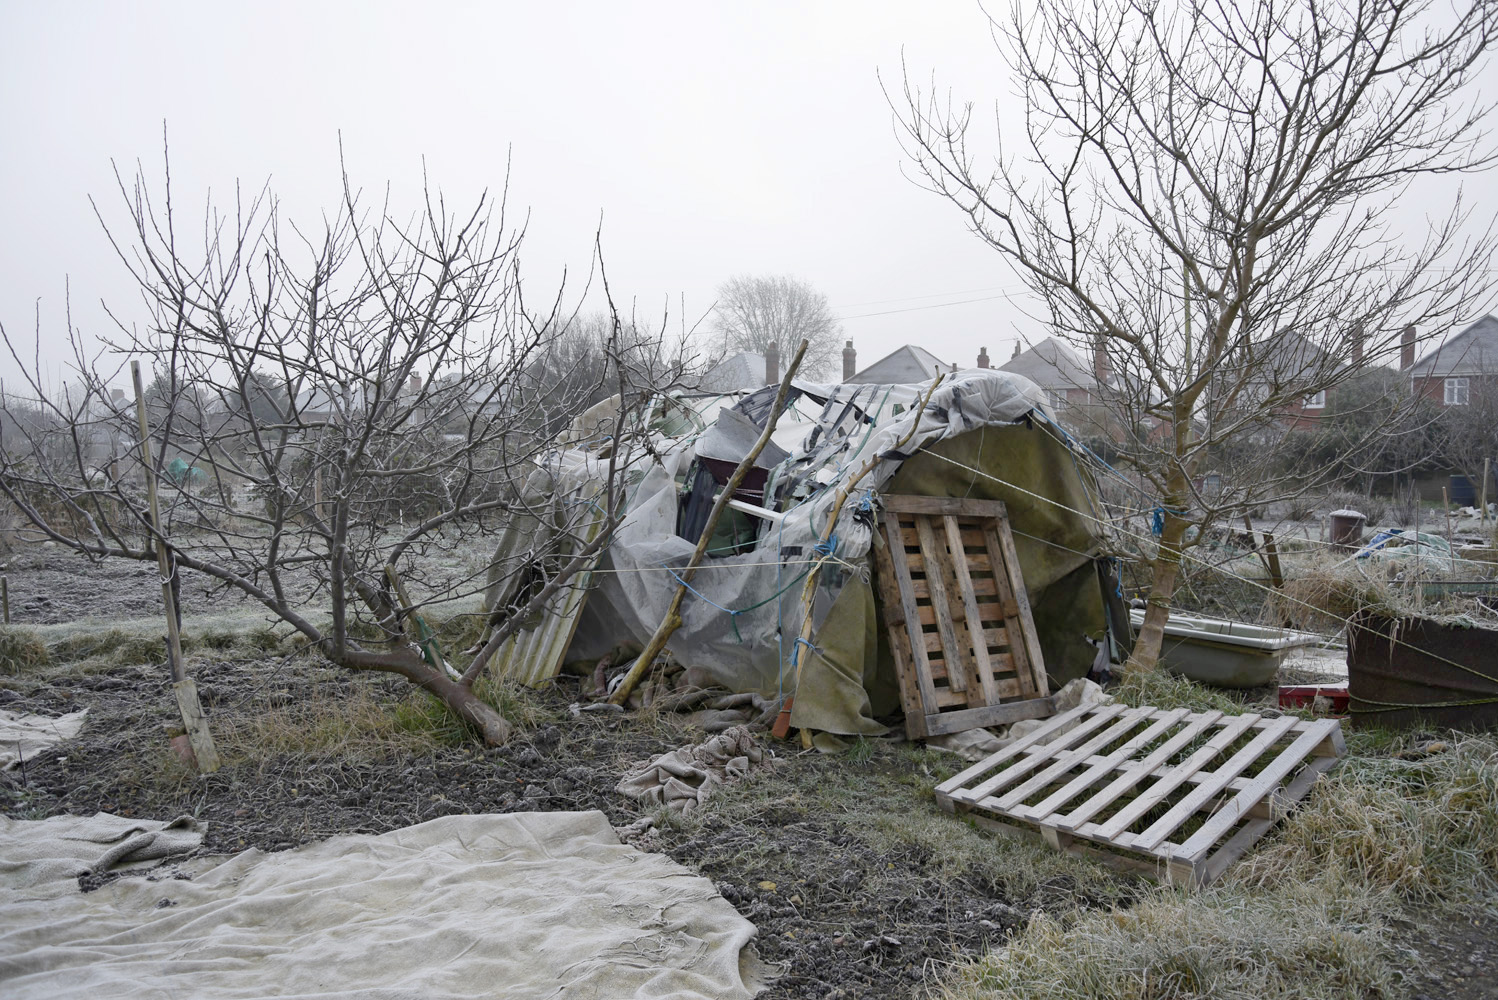 Lesley Farrell, Shack, from the series Allotment Architecture, 2017